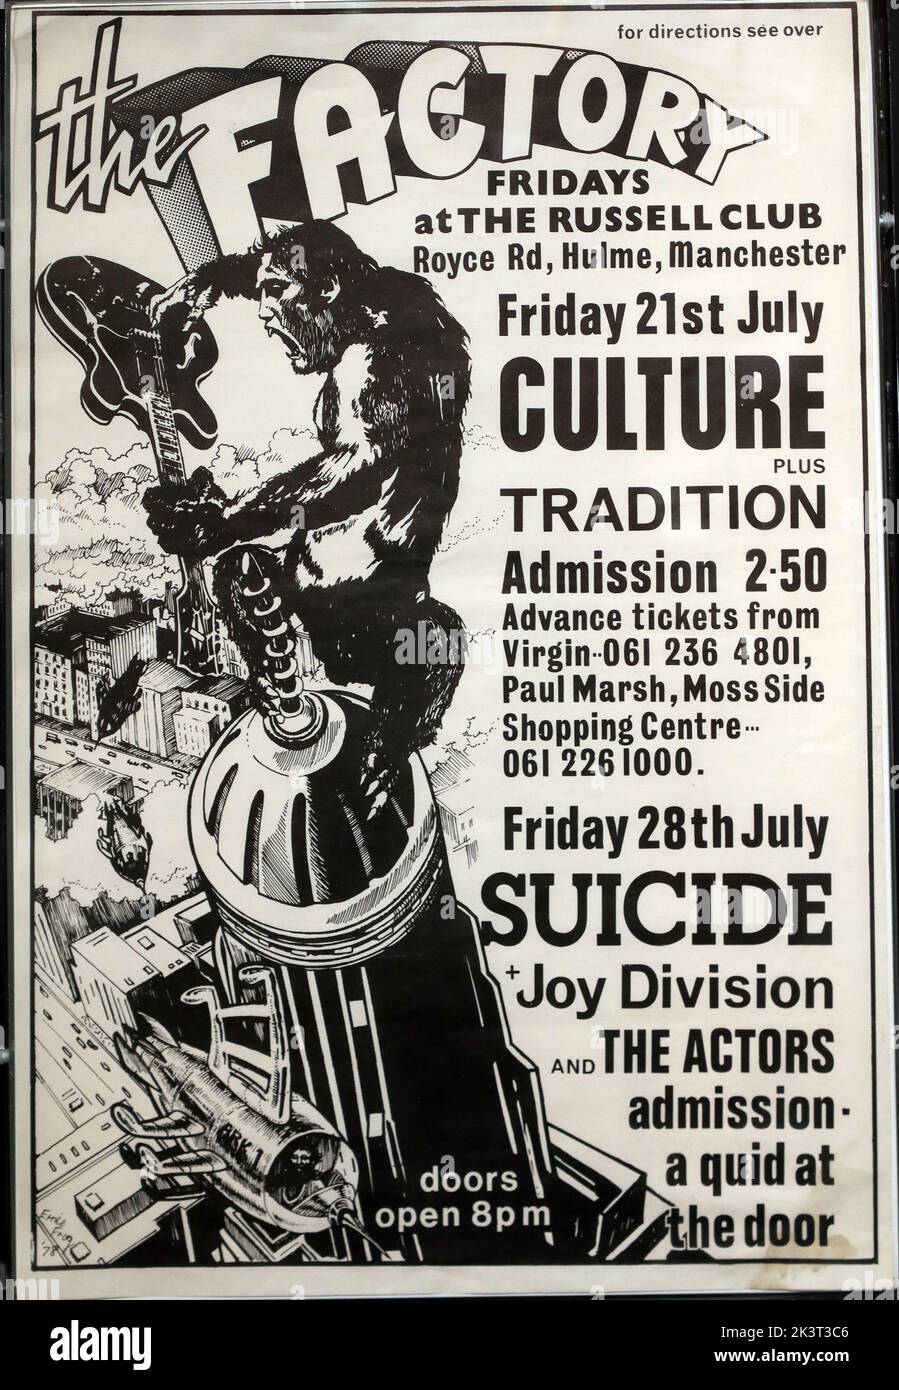 The Factory Fridays,at the Russell Club,Royce Rd,Hulme,21st July 1978,Culture,Tradition,Friday,28th July,Suicide,Joy Division & The Actors Stock Photo